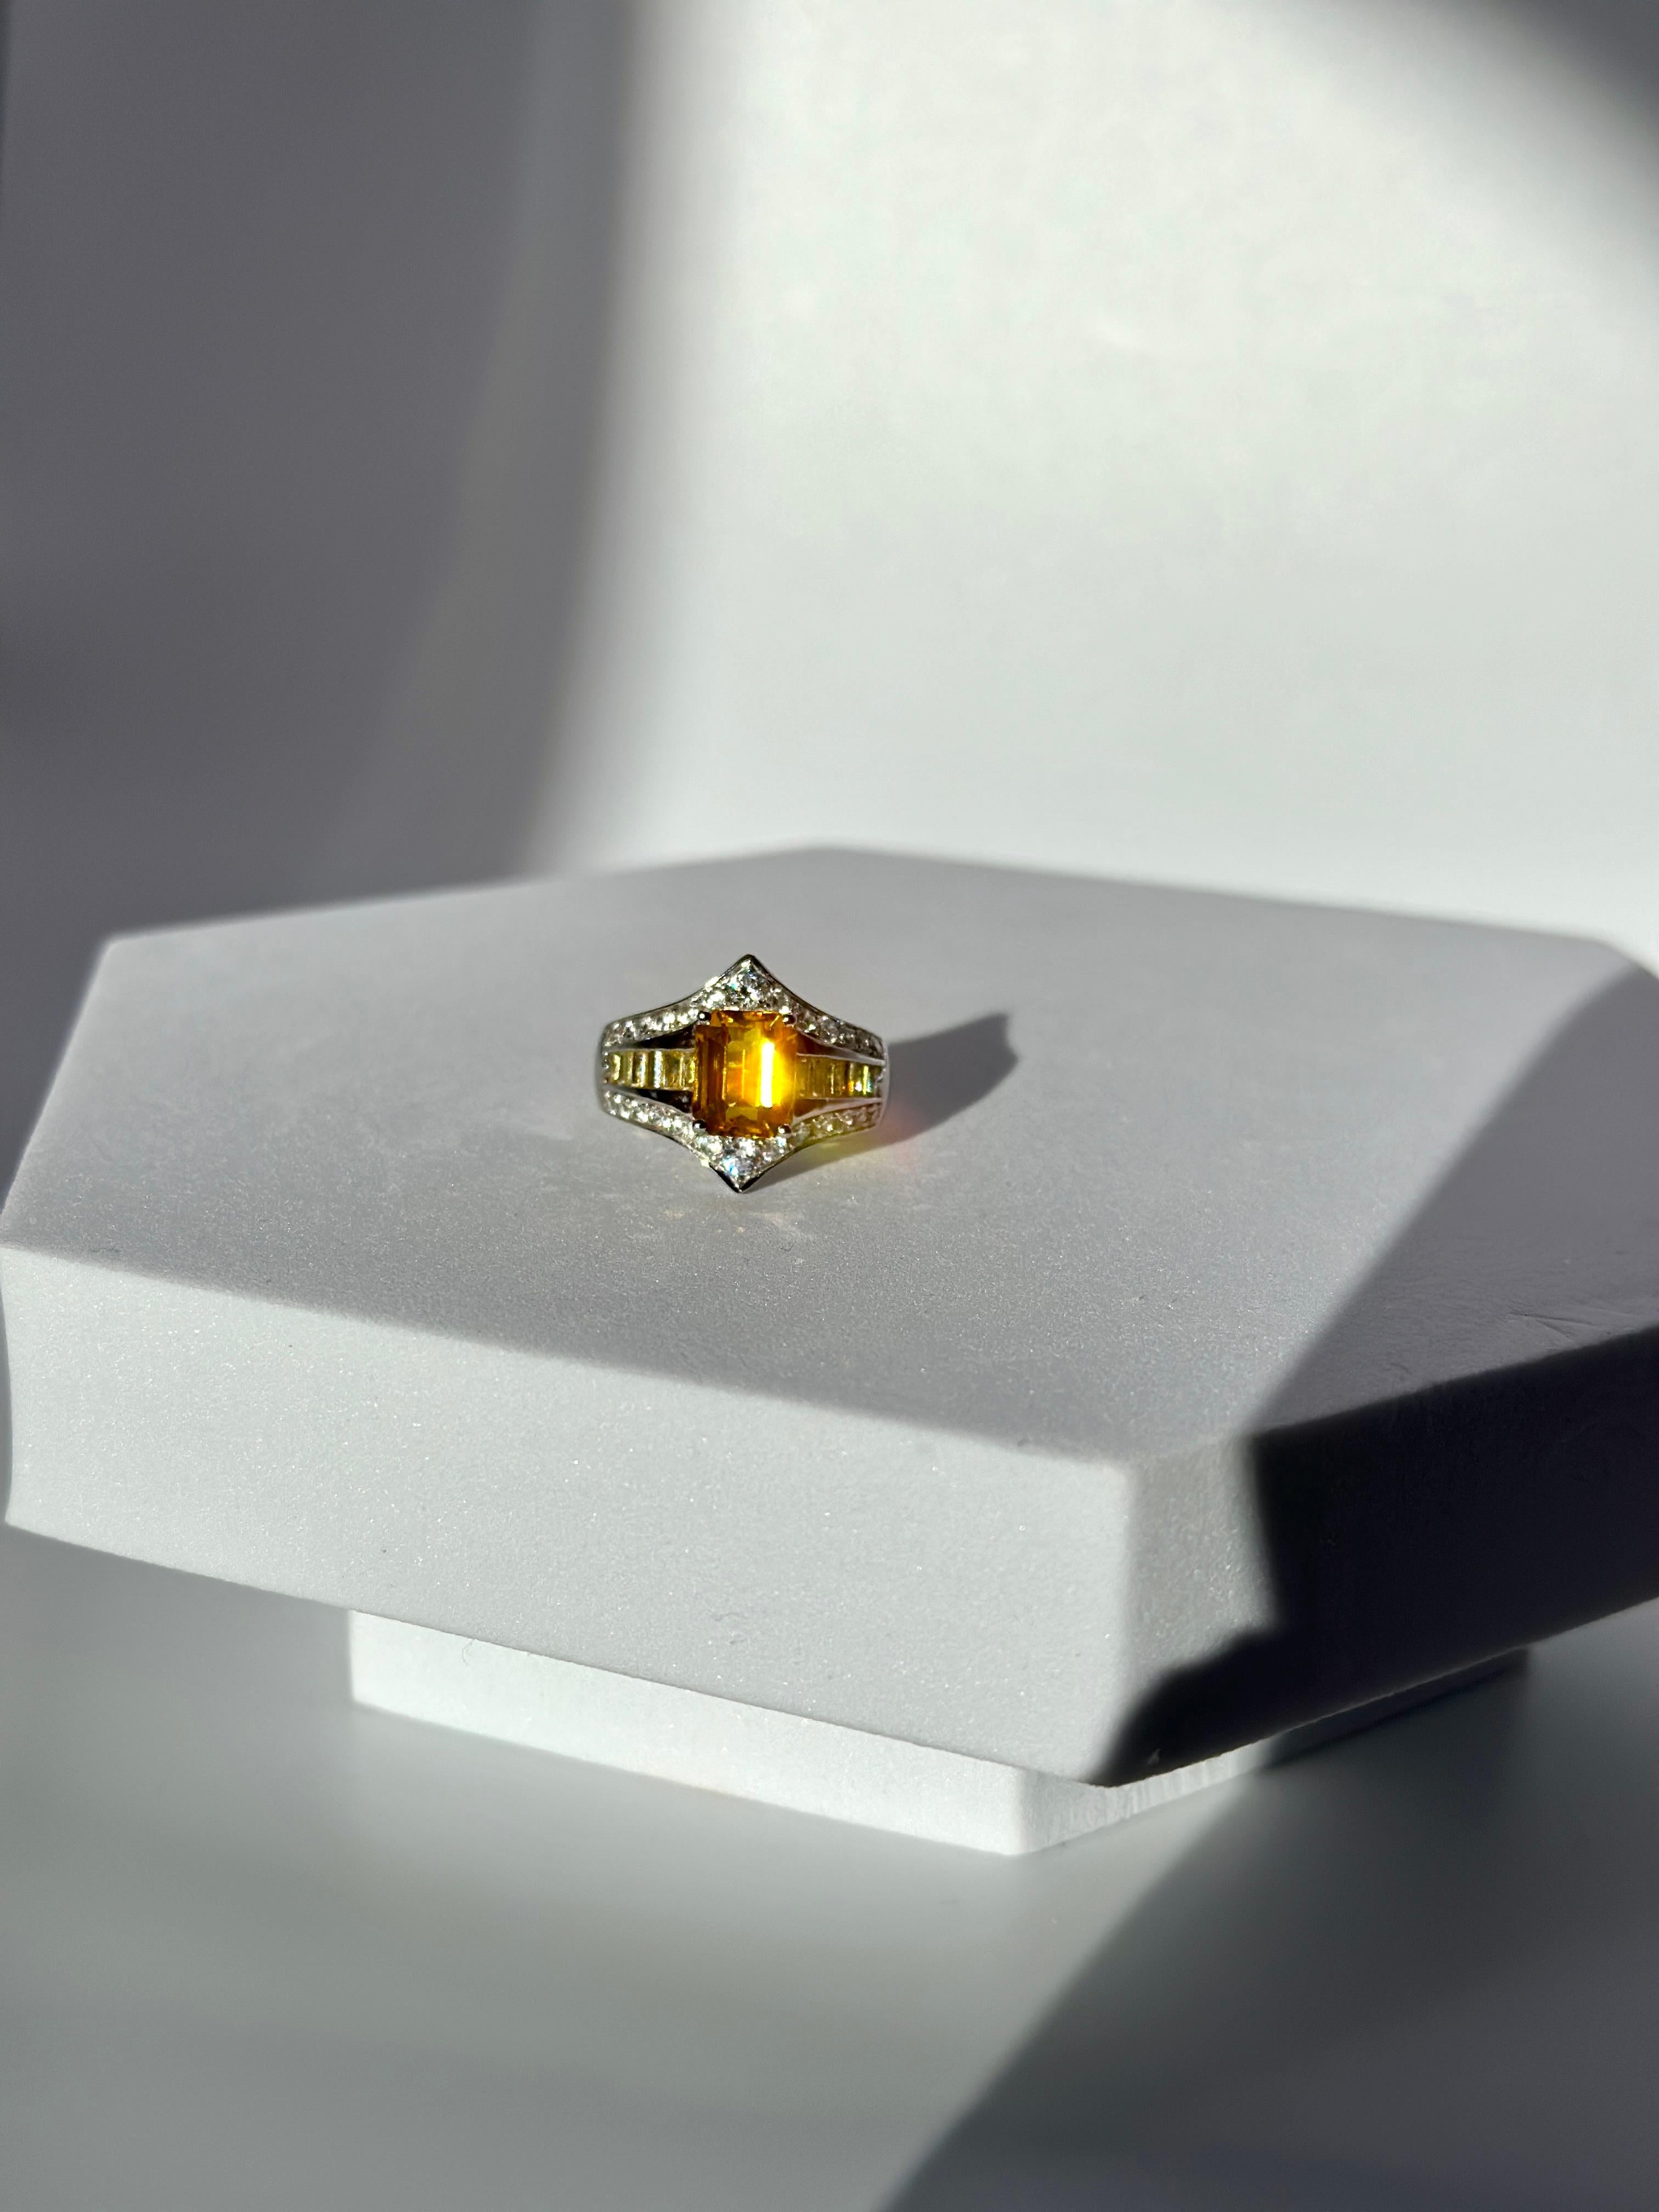 2ct emerald cut natural yellow sapphire on a 9k gold setting, a shield shape, meant to protect and may wealth and riches be drawn your way.
 the colorless stones are cubic zirconia, yellow ones are natural yellow sapphires. 